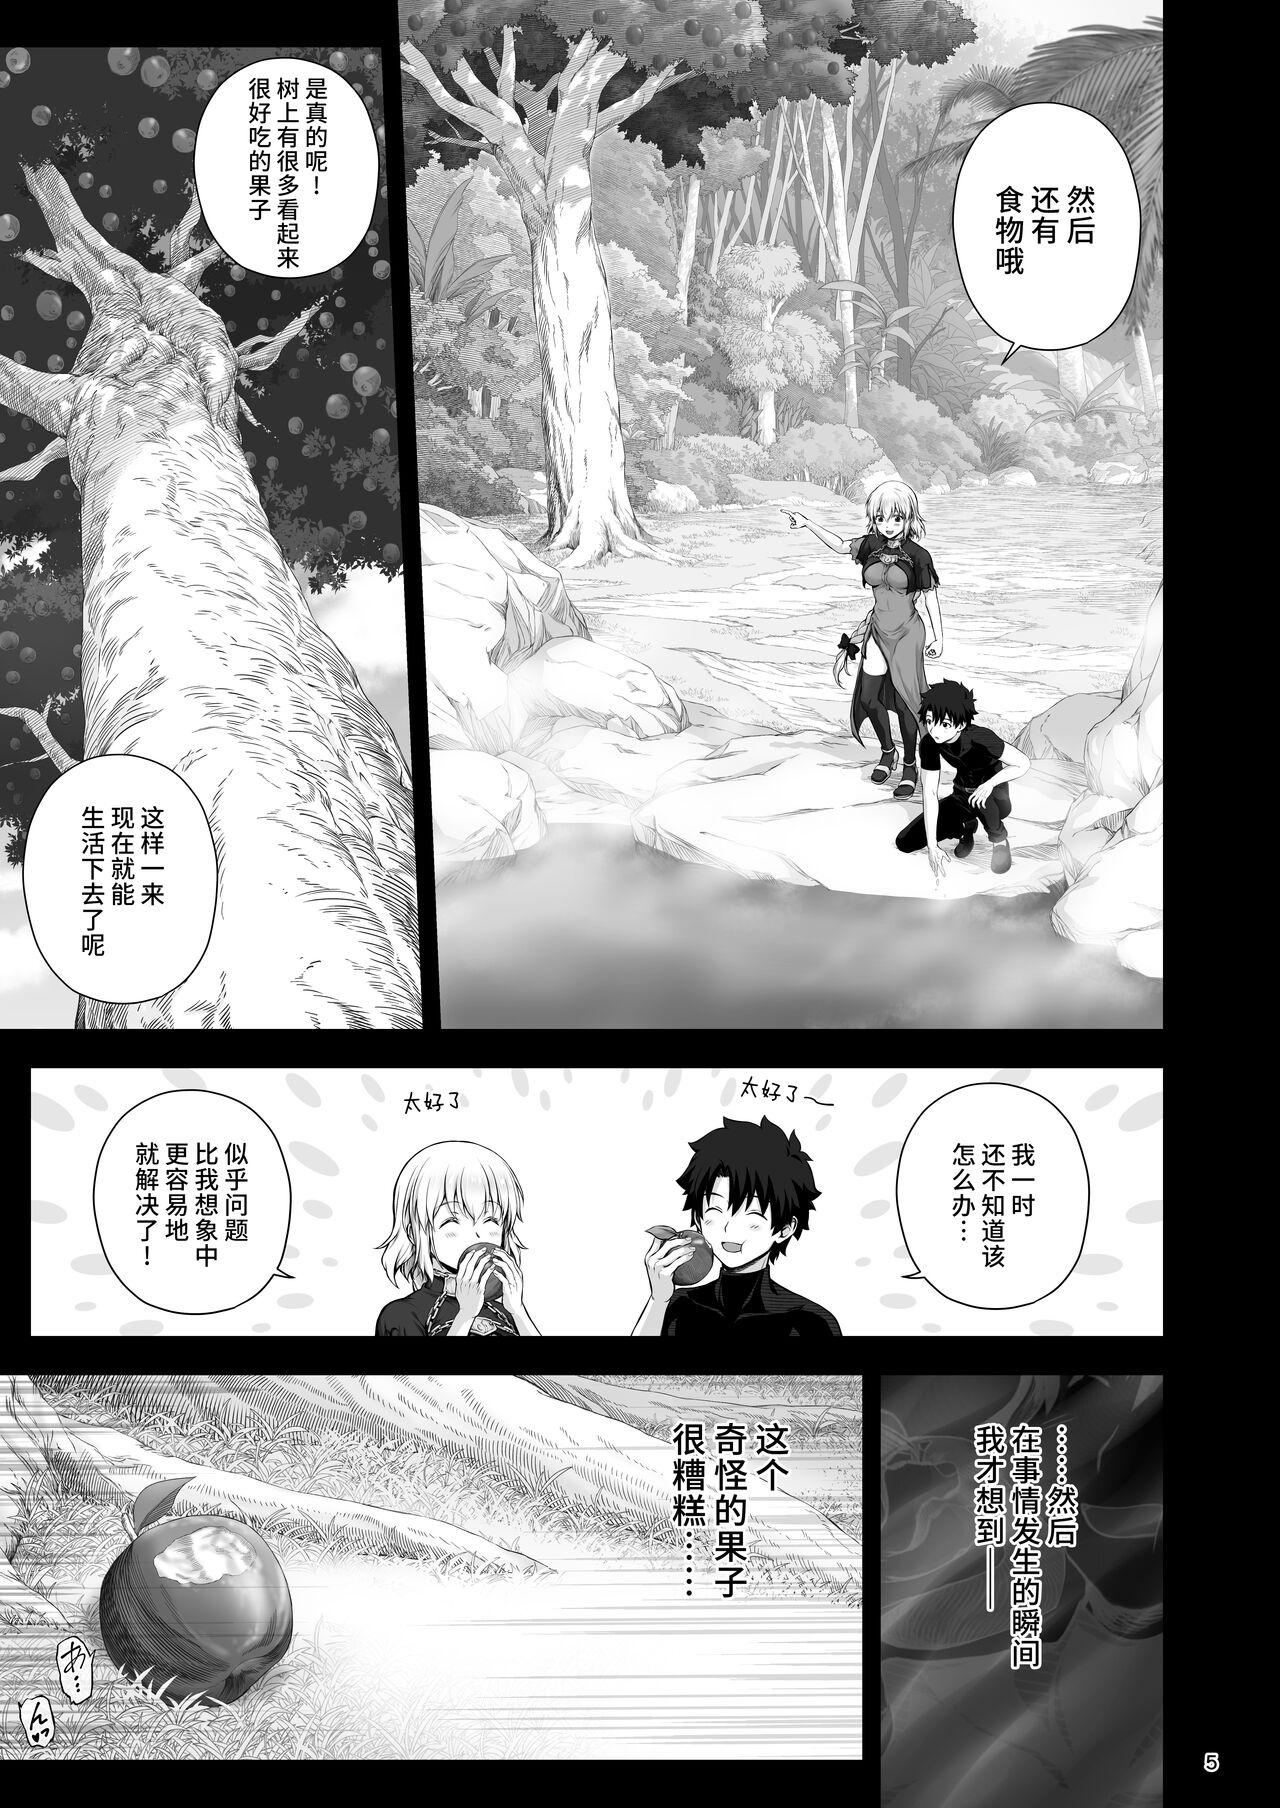 Gaydudes Jeanne to Saiin Hitou - Fate grand order Step Fantasy - Page 6